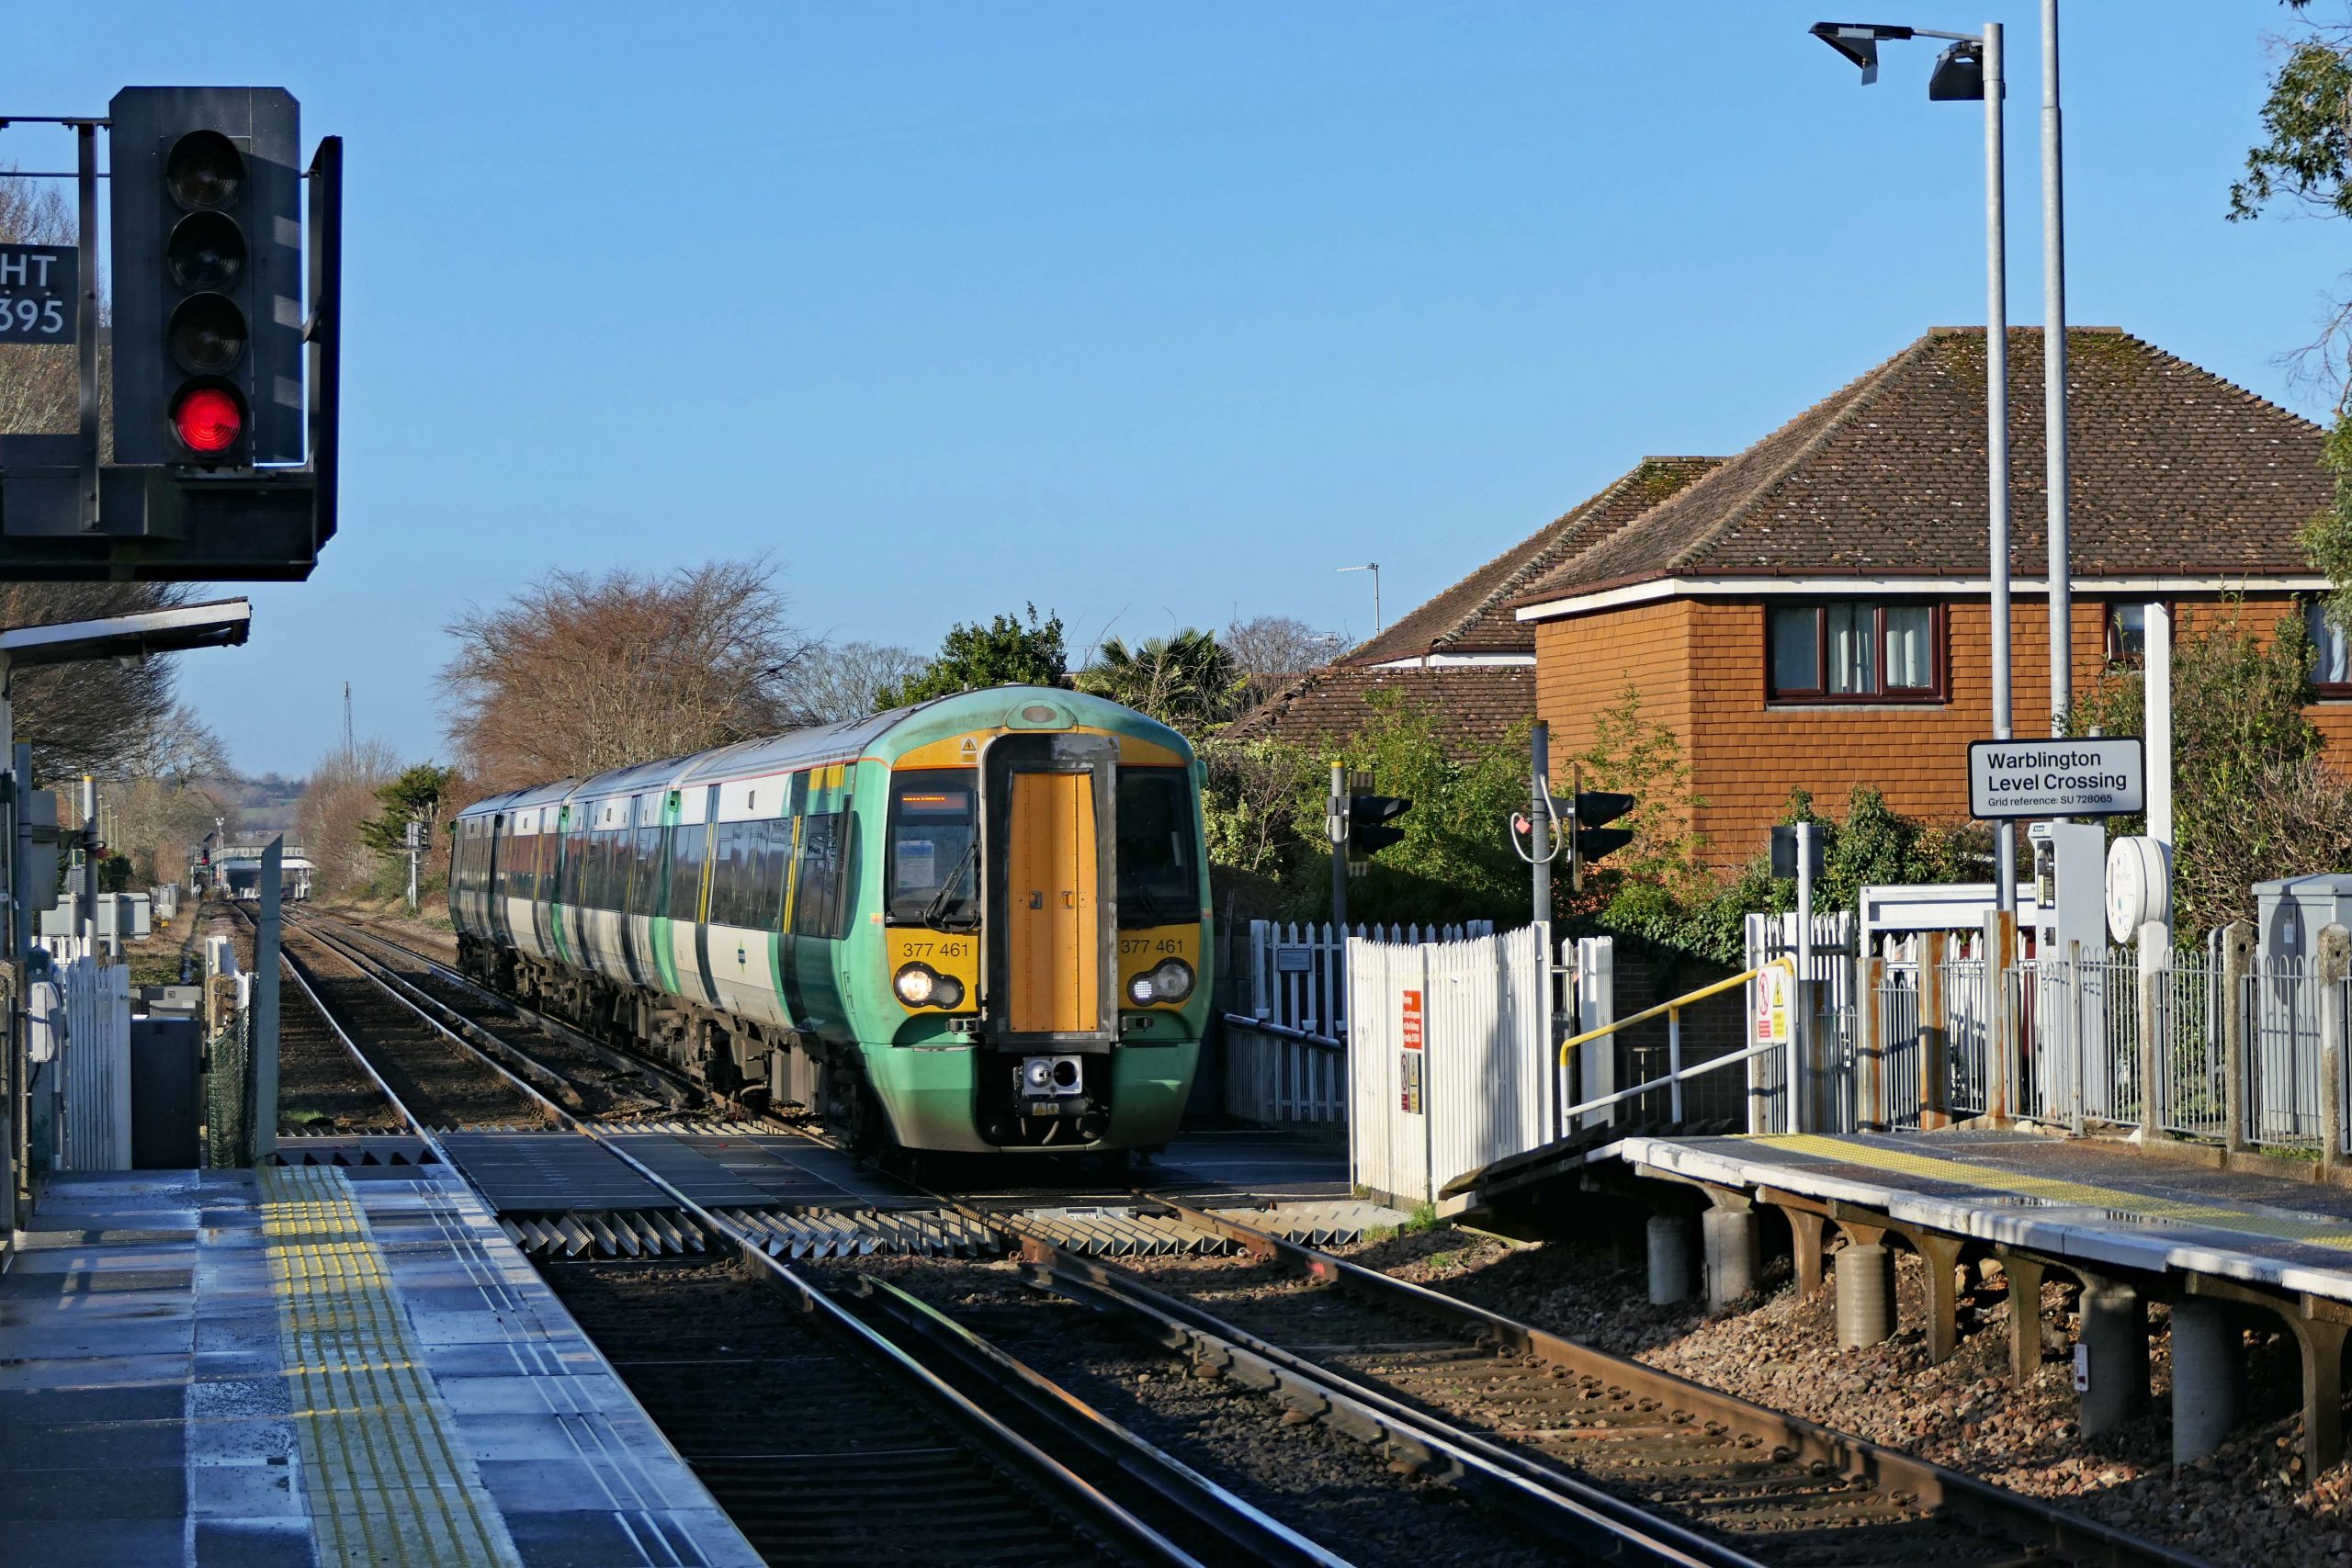 Southern Class 377 461 passes over the pedestrian and road crossing at Warblington, Thursday 20 January 2022.